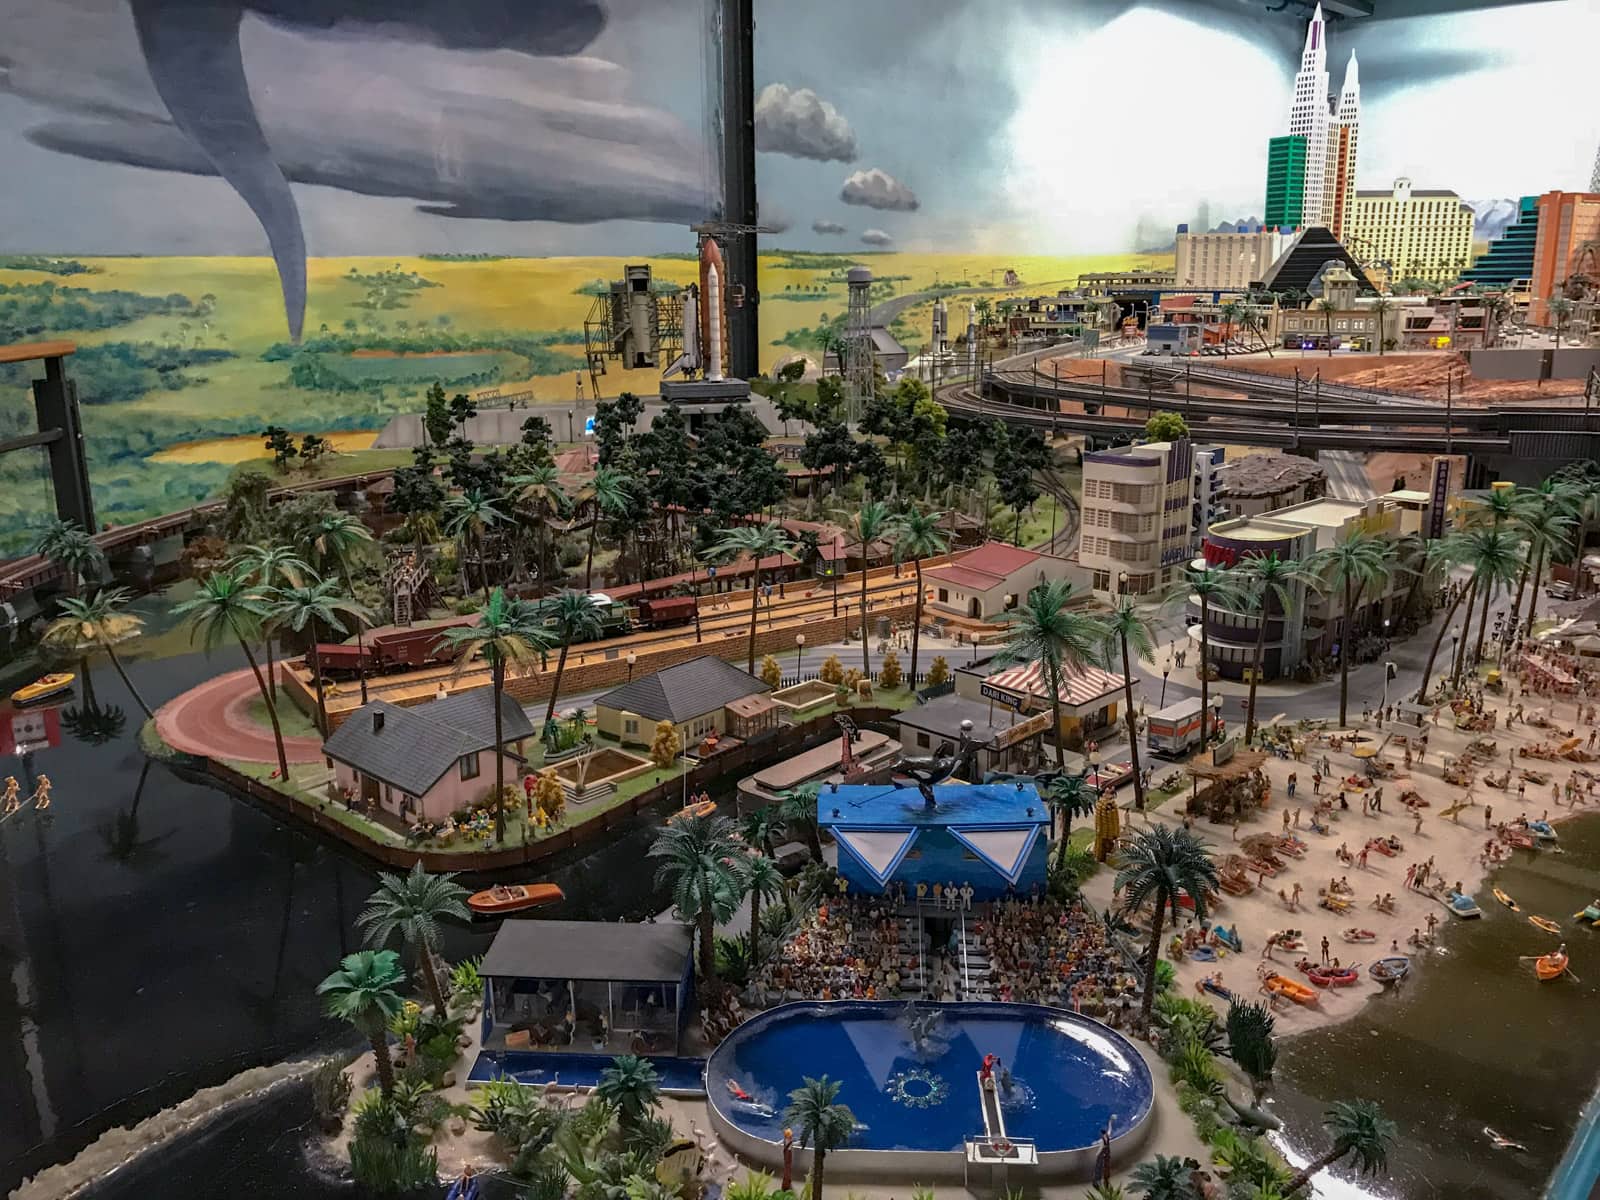 A miniature replica of a beach resort, as part of a model railway, with dozens of people and real water. There is exceptional detail.